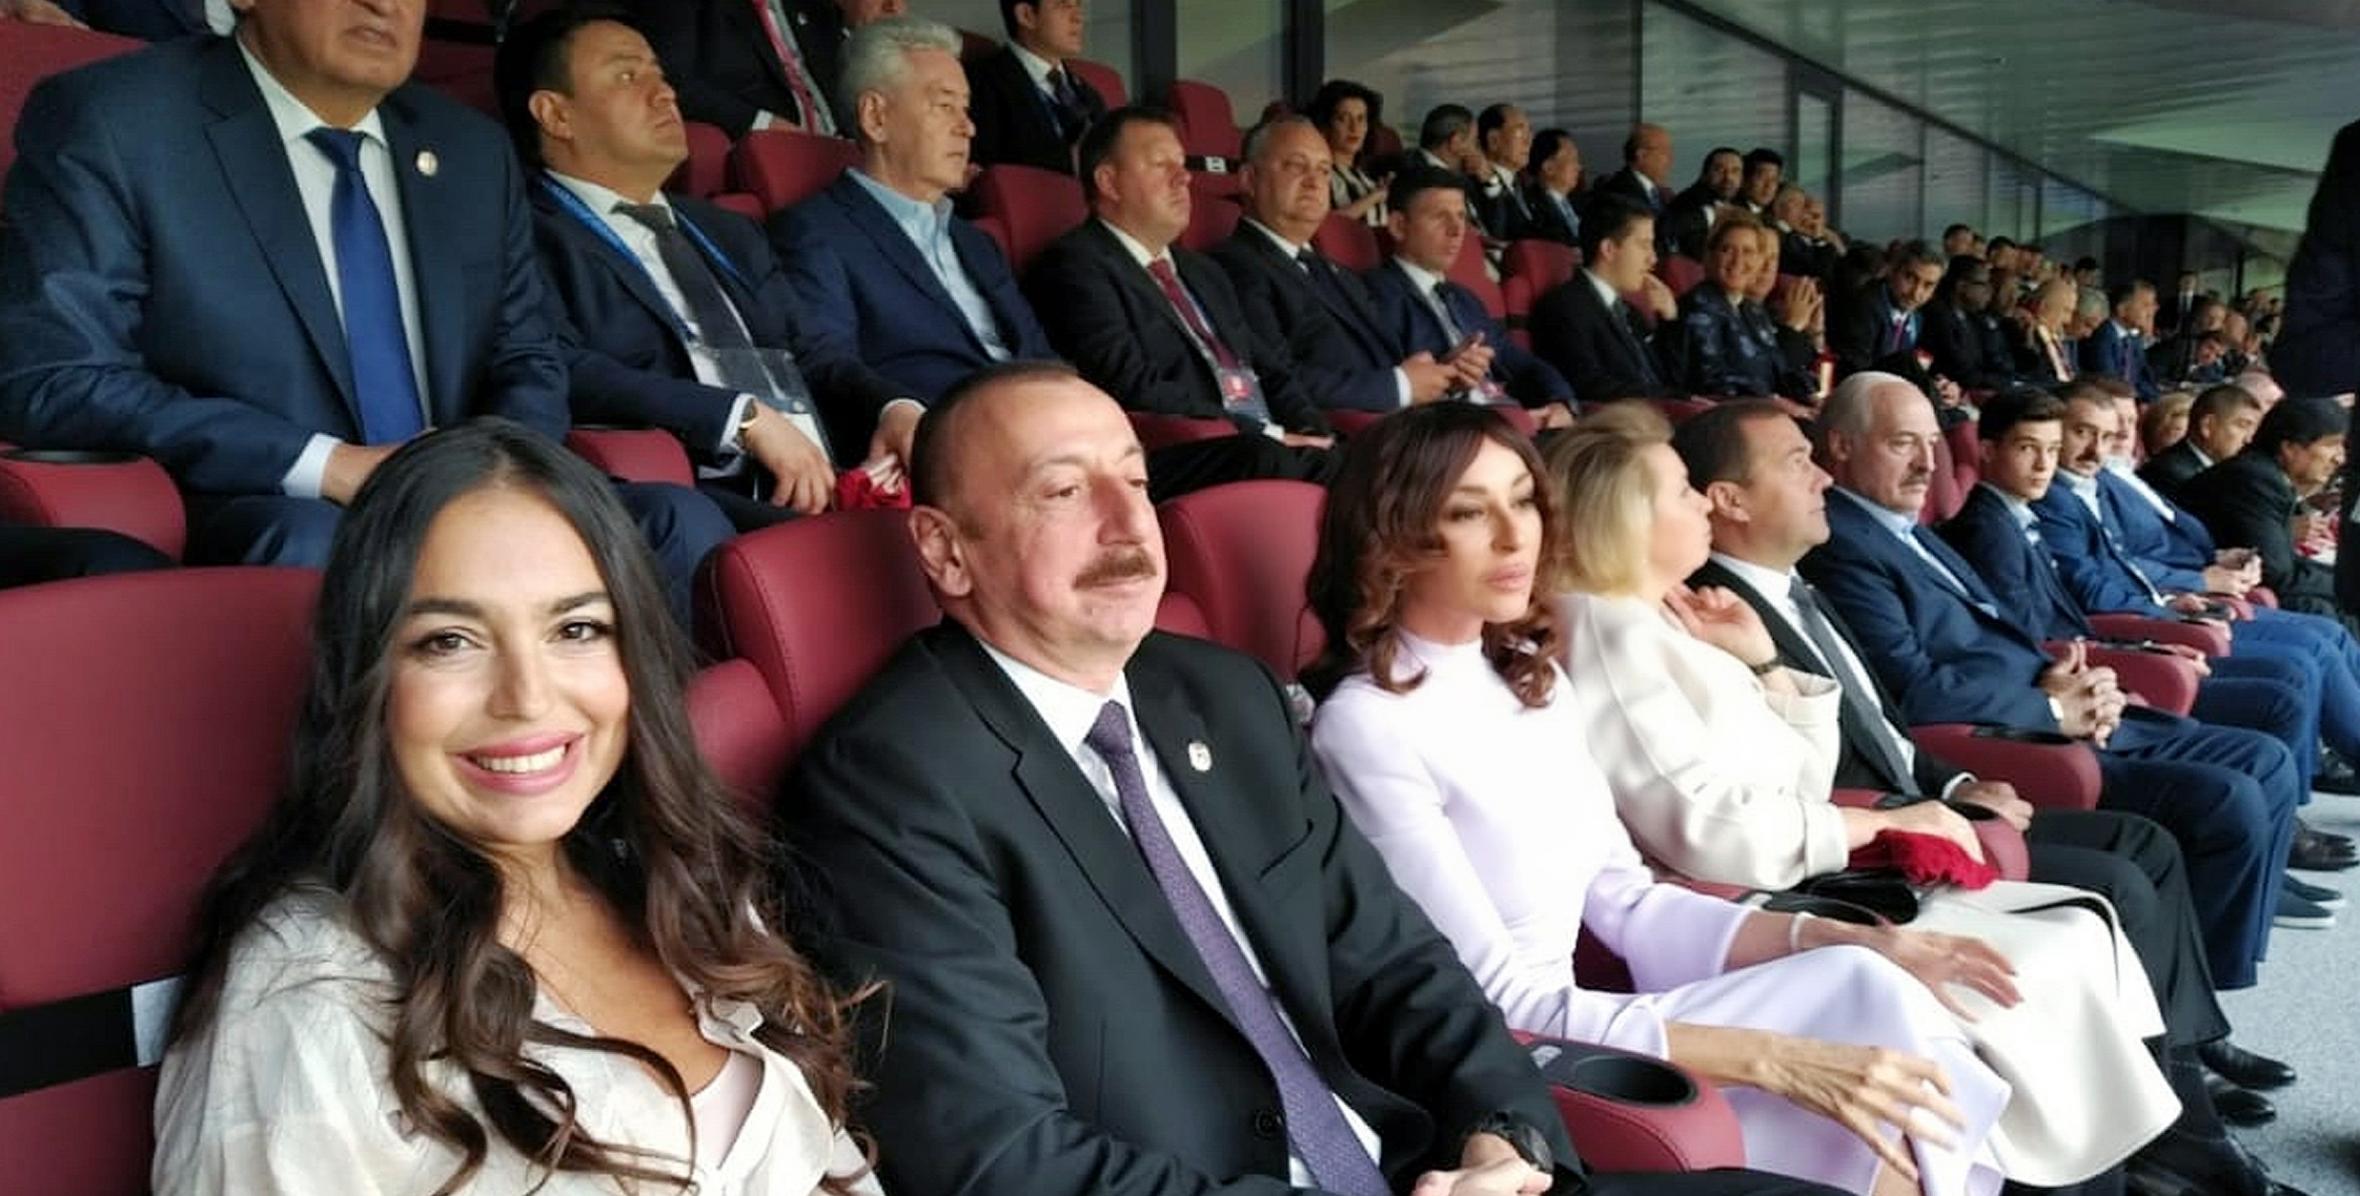 Ilham Aliyev attended the ceremony of FIFA World Cup held in Moscow